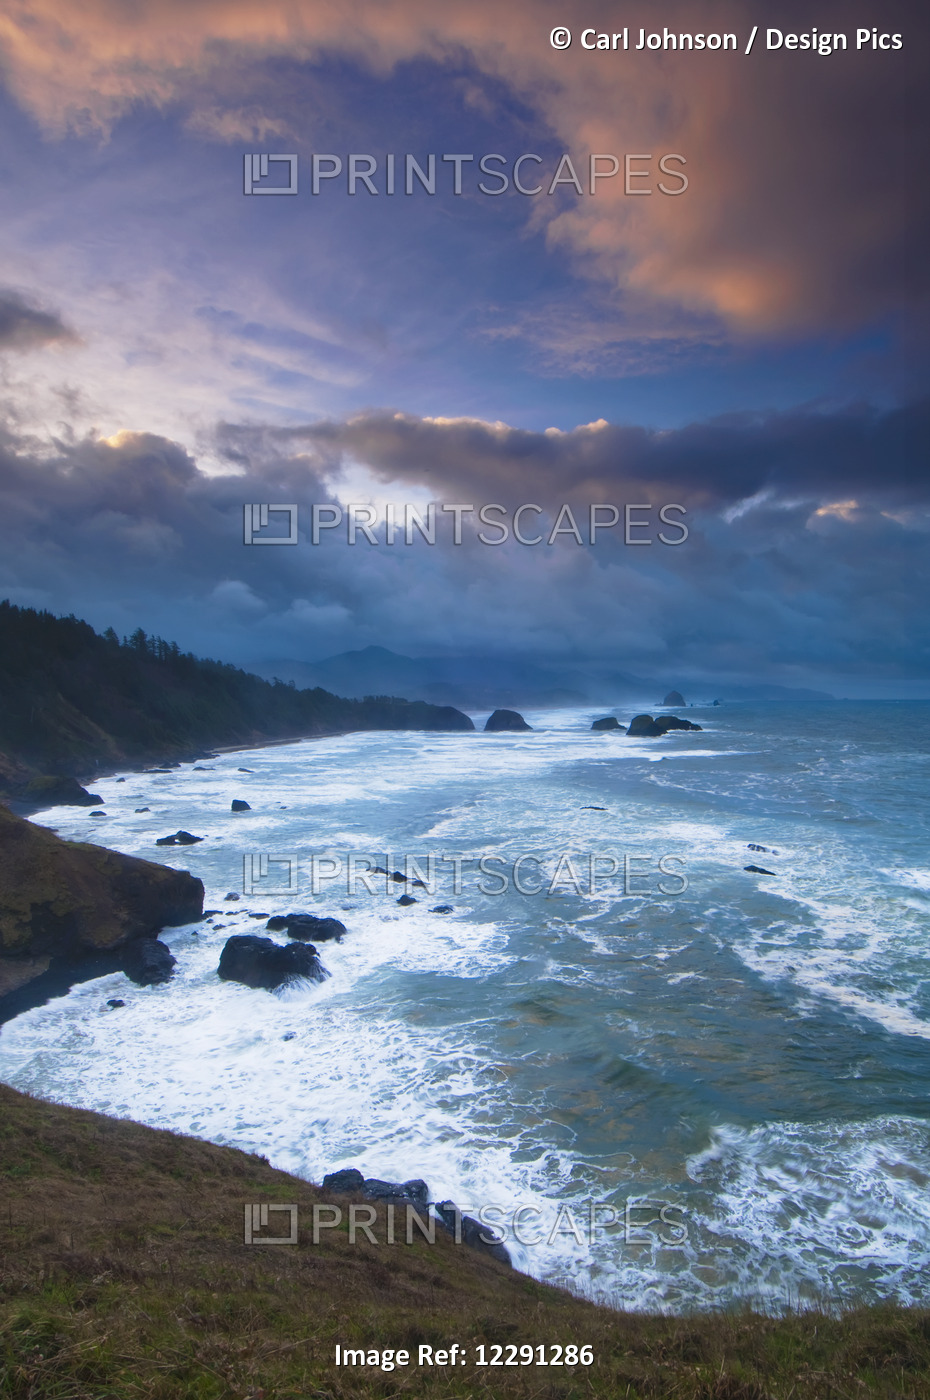 A Morning Storm Brews On The Pacific Coast In This View From Ecola State Park, ...